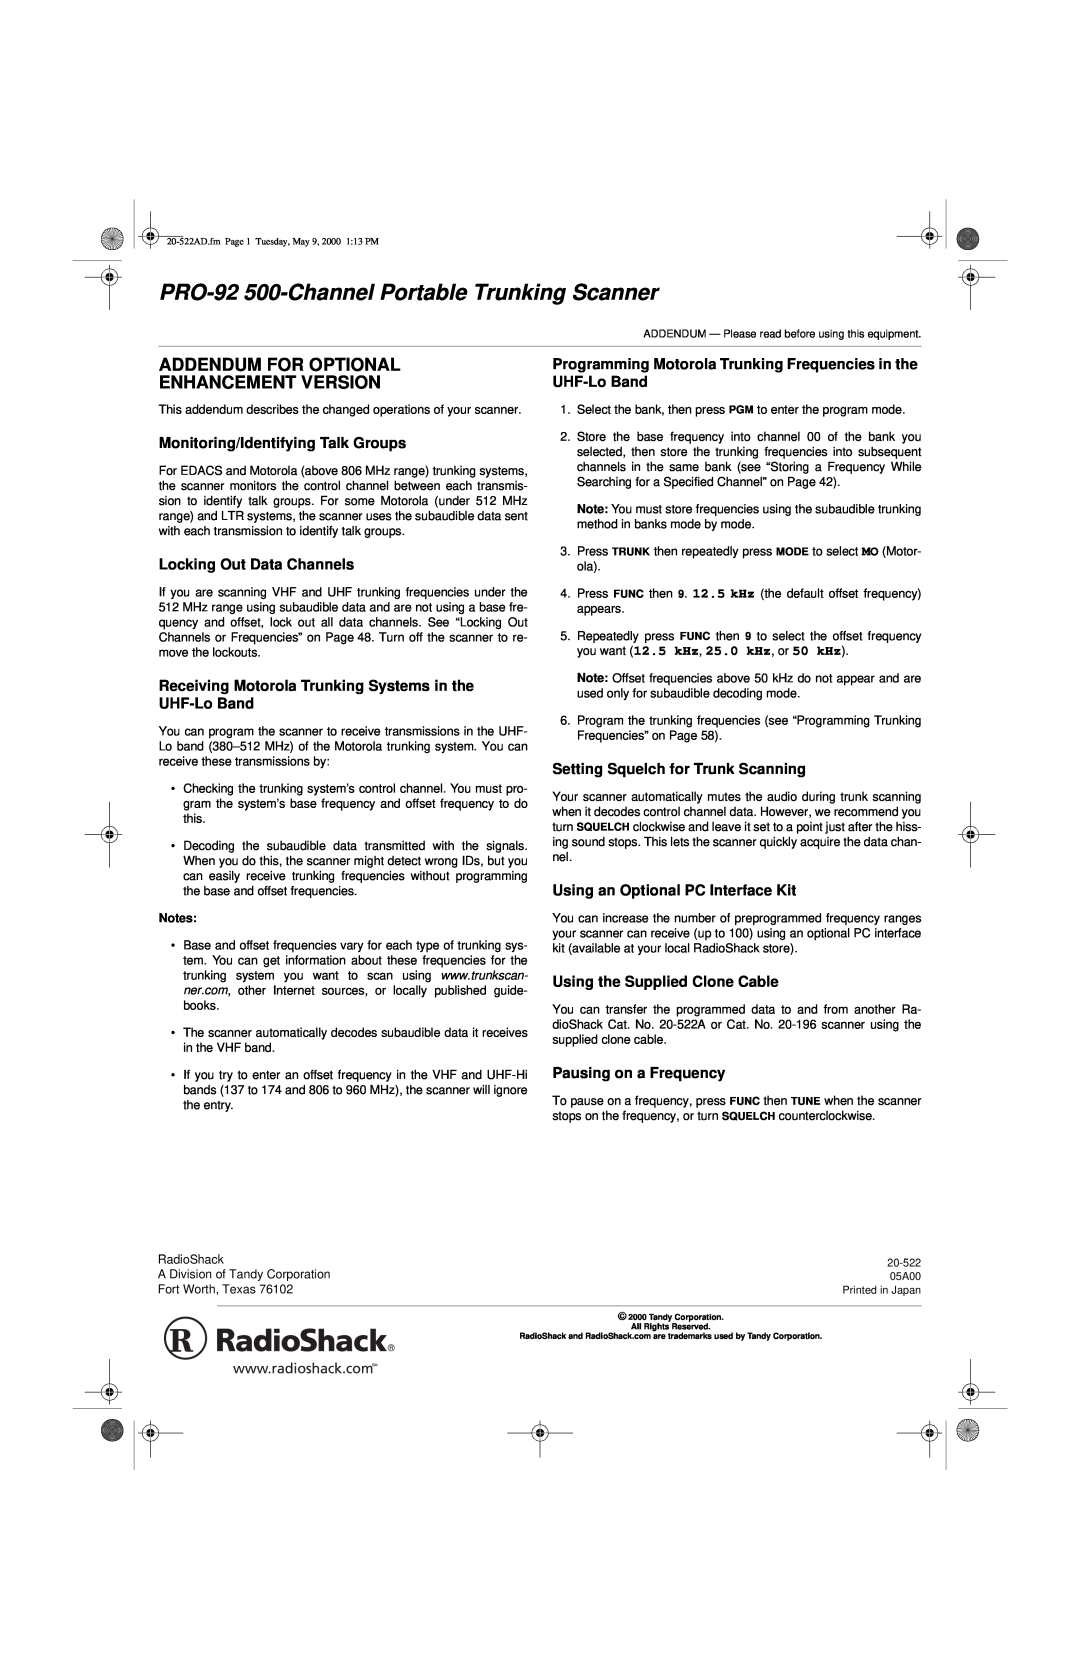 Radio Shack PRO-92 manual Monitoring/Identifying Talk Groups, Locking Out Data Channels, Using the Supplied Clone Cable 